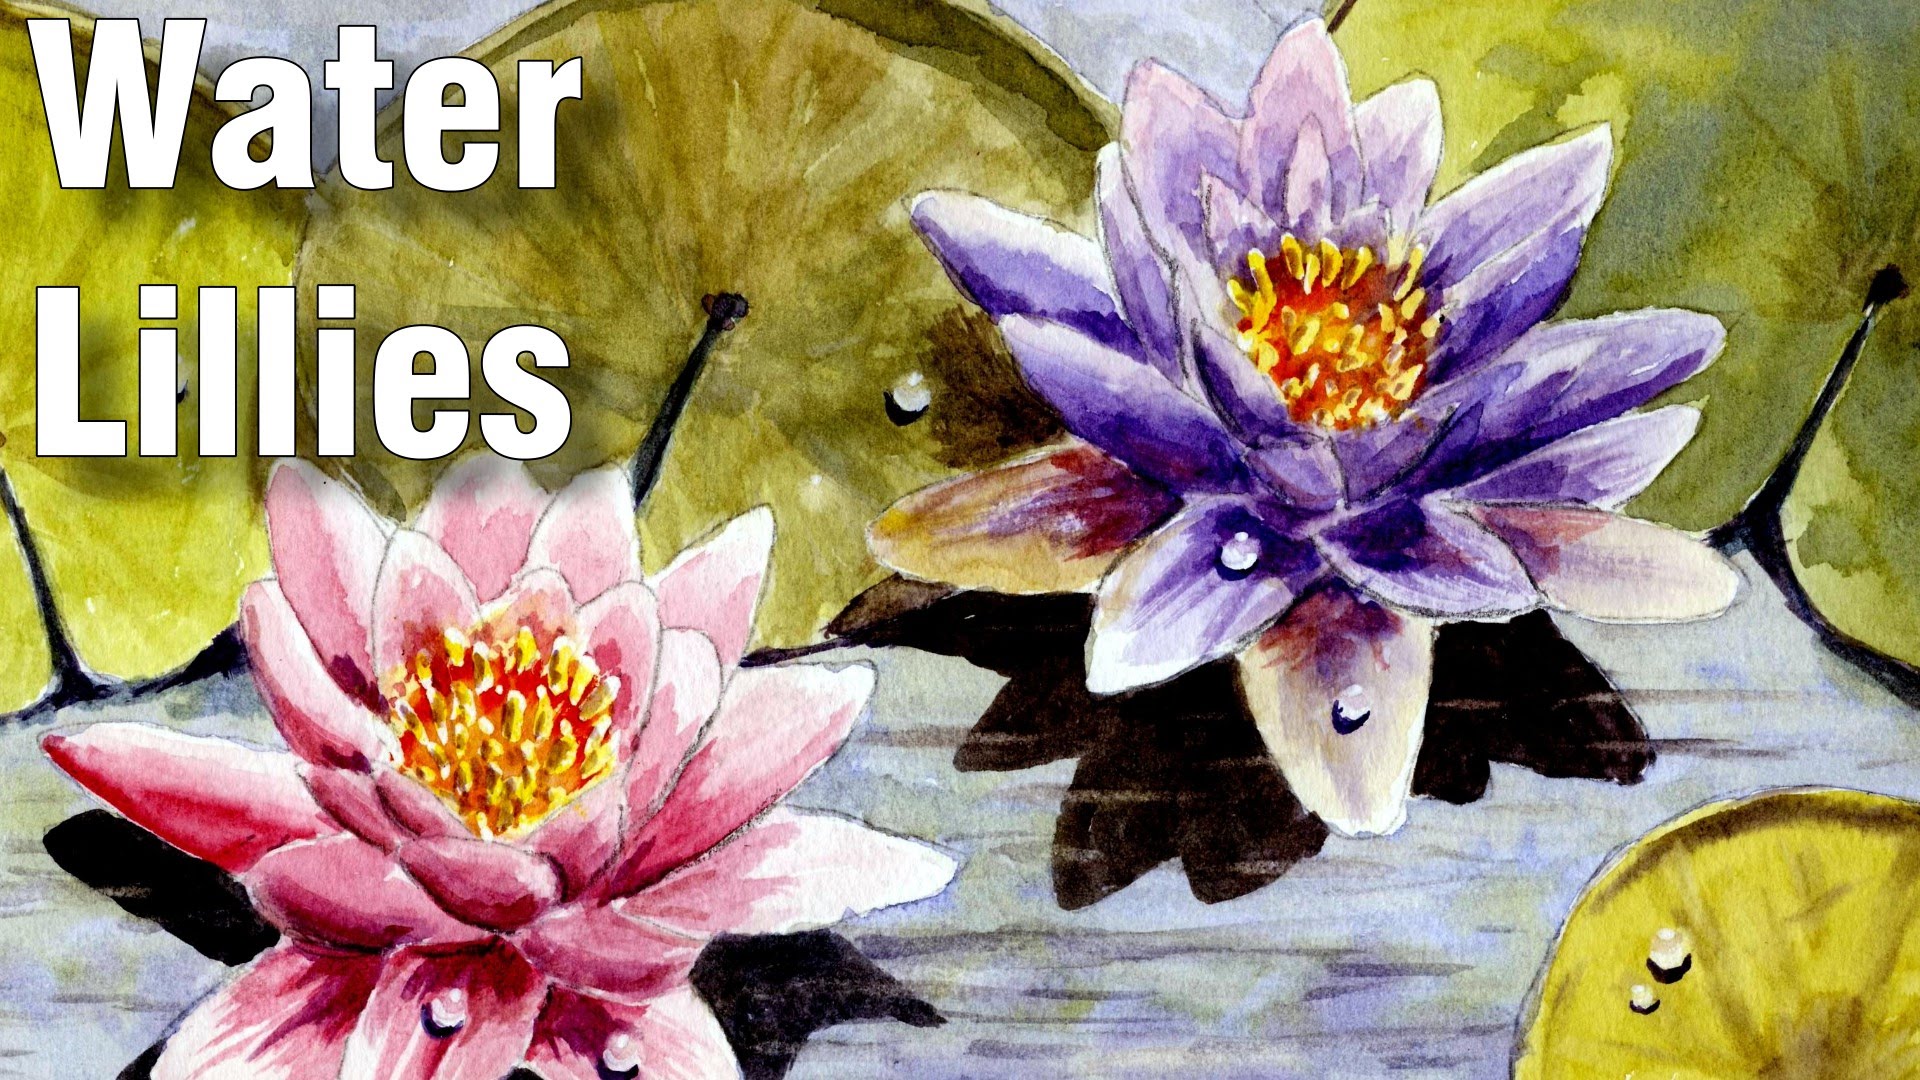 painting water lilies in watercolor 1 - YouTube